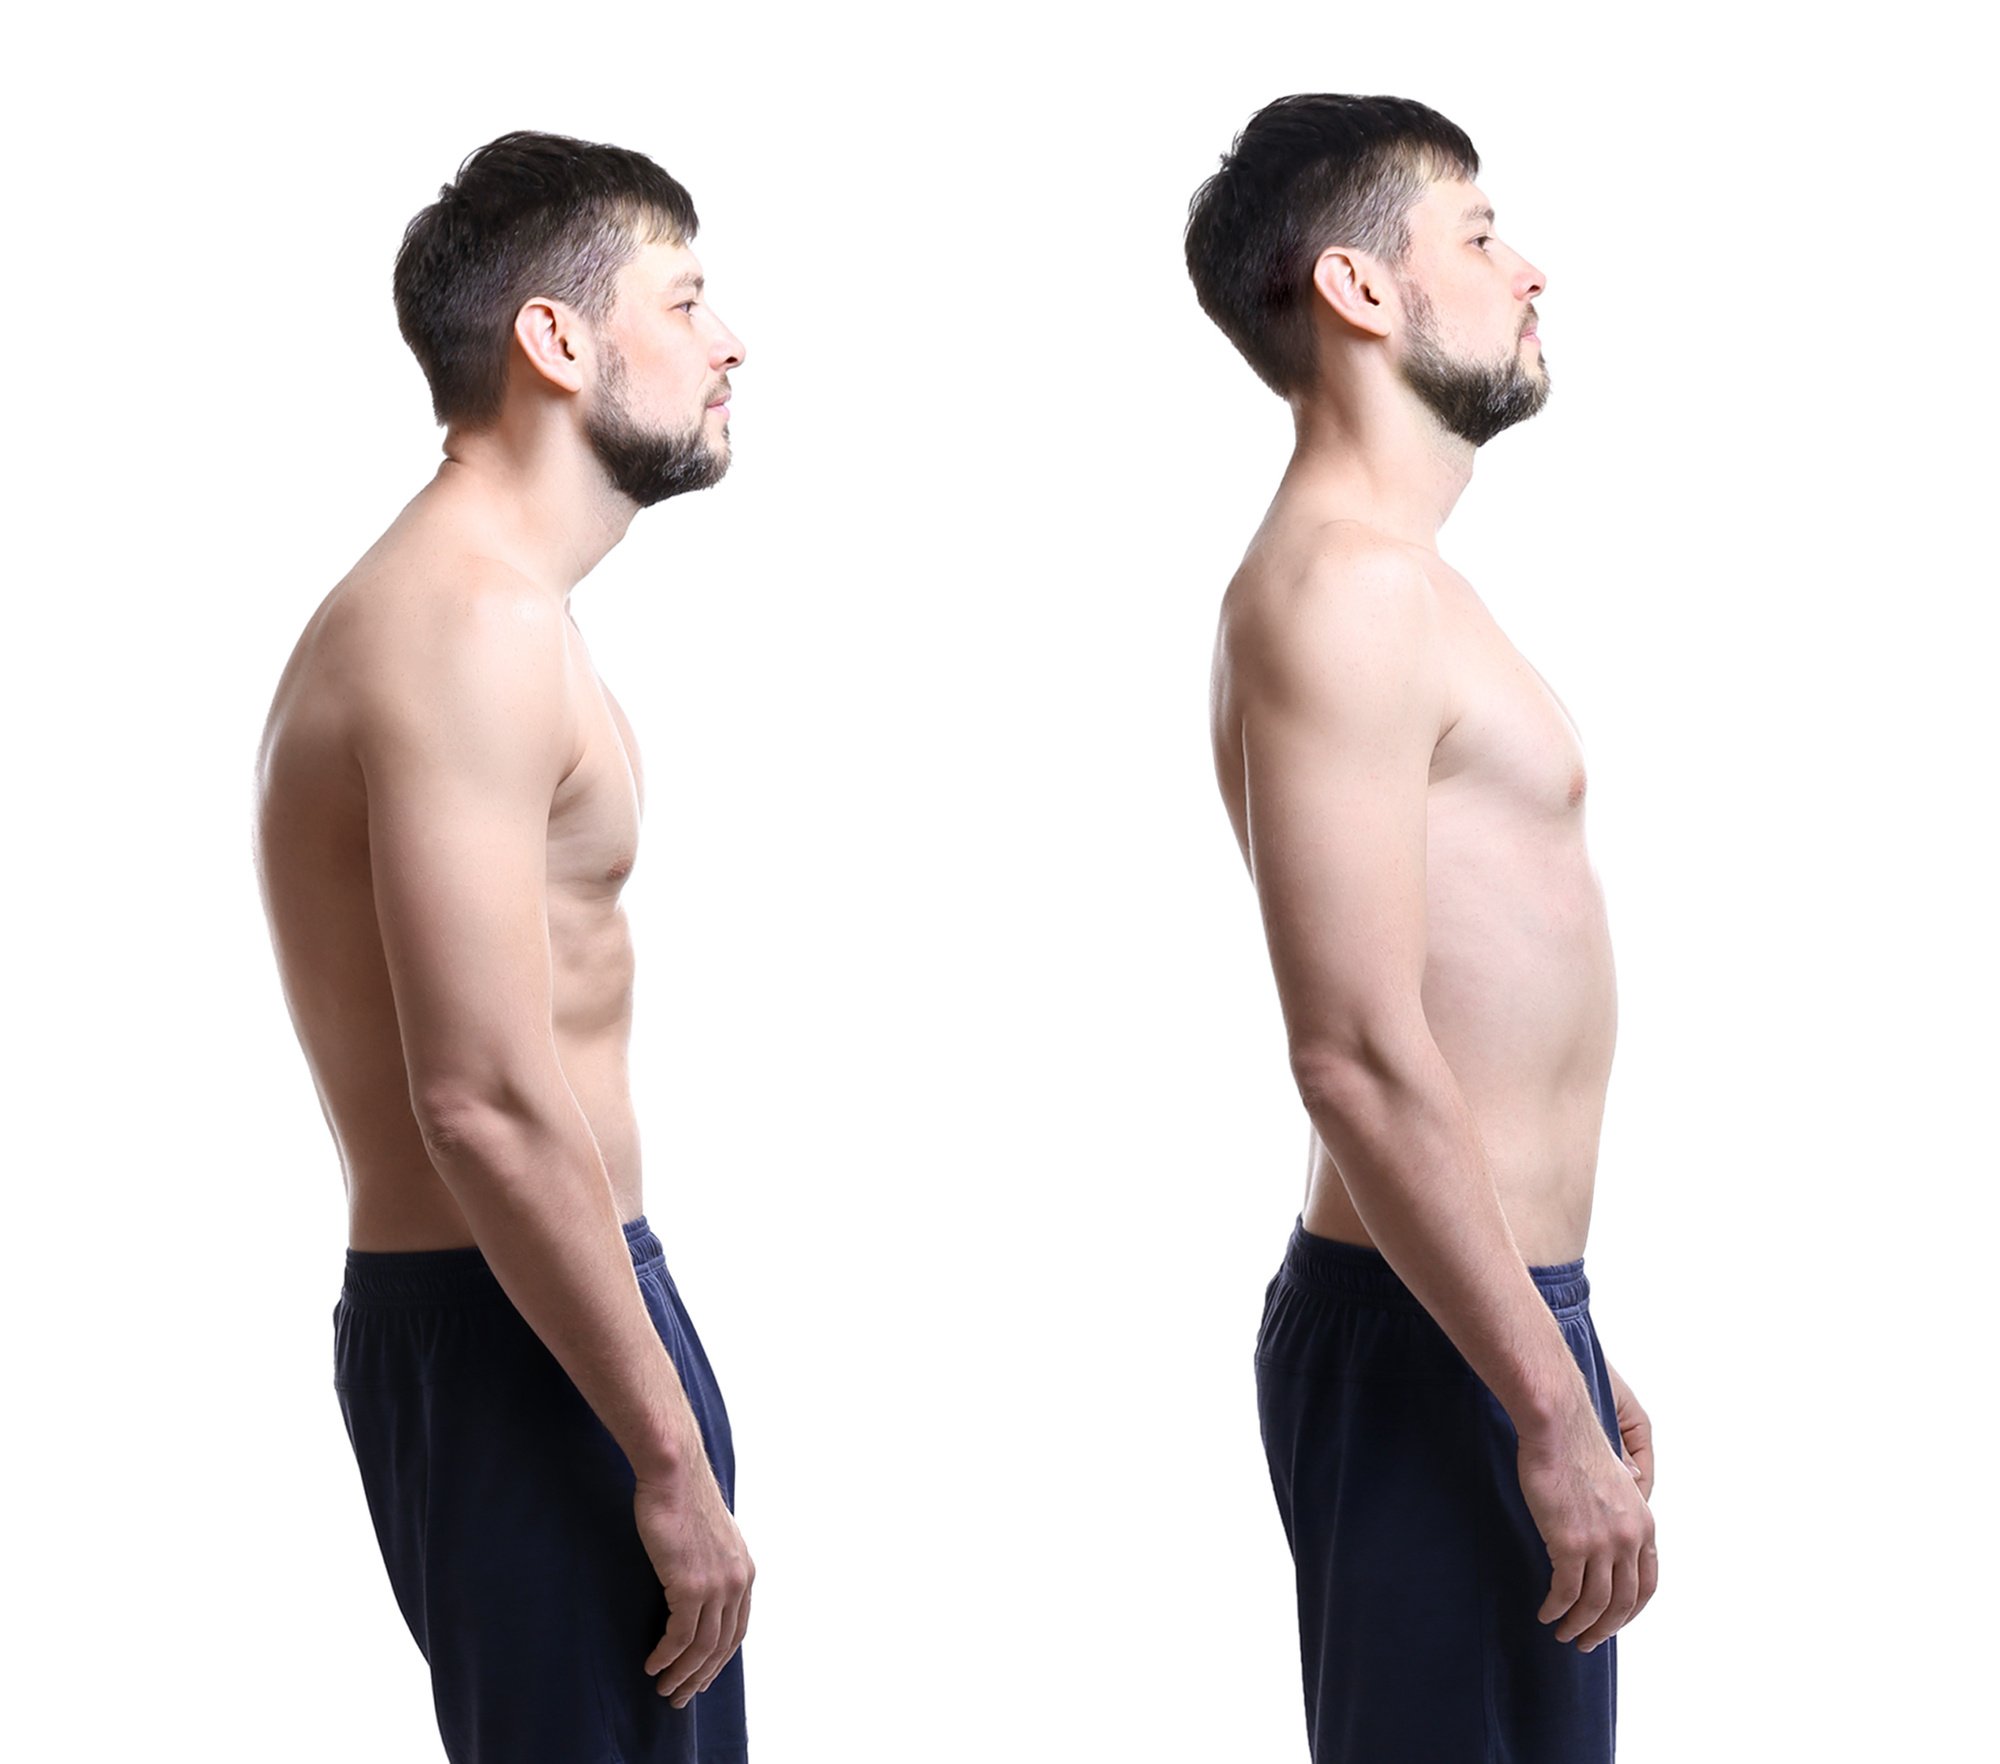 Posture - How to Improve and Experience its Health Benefits